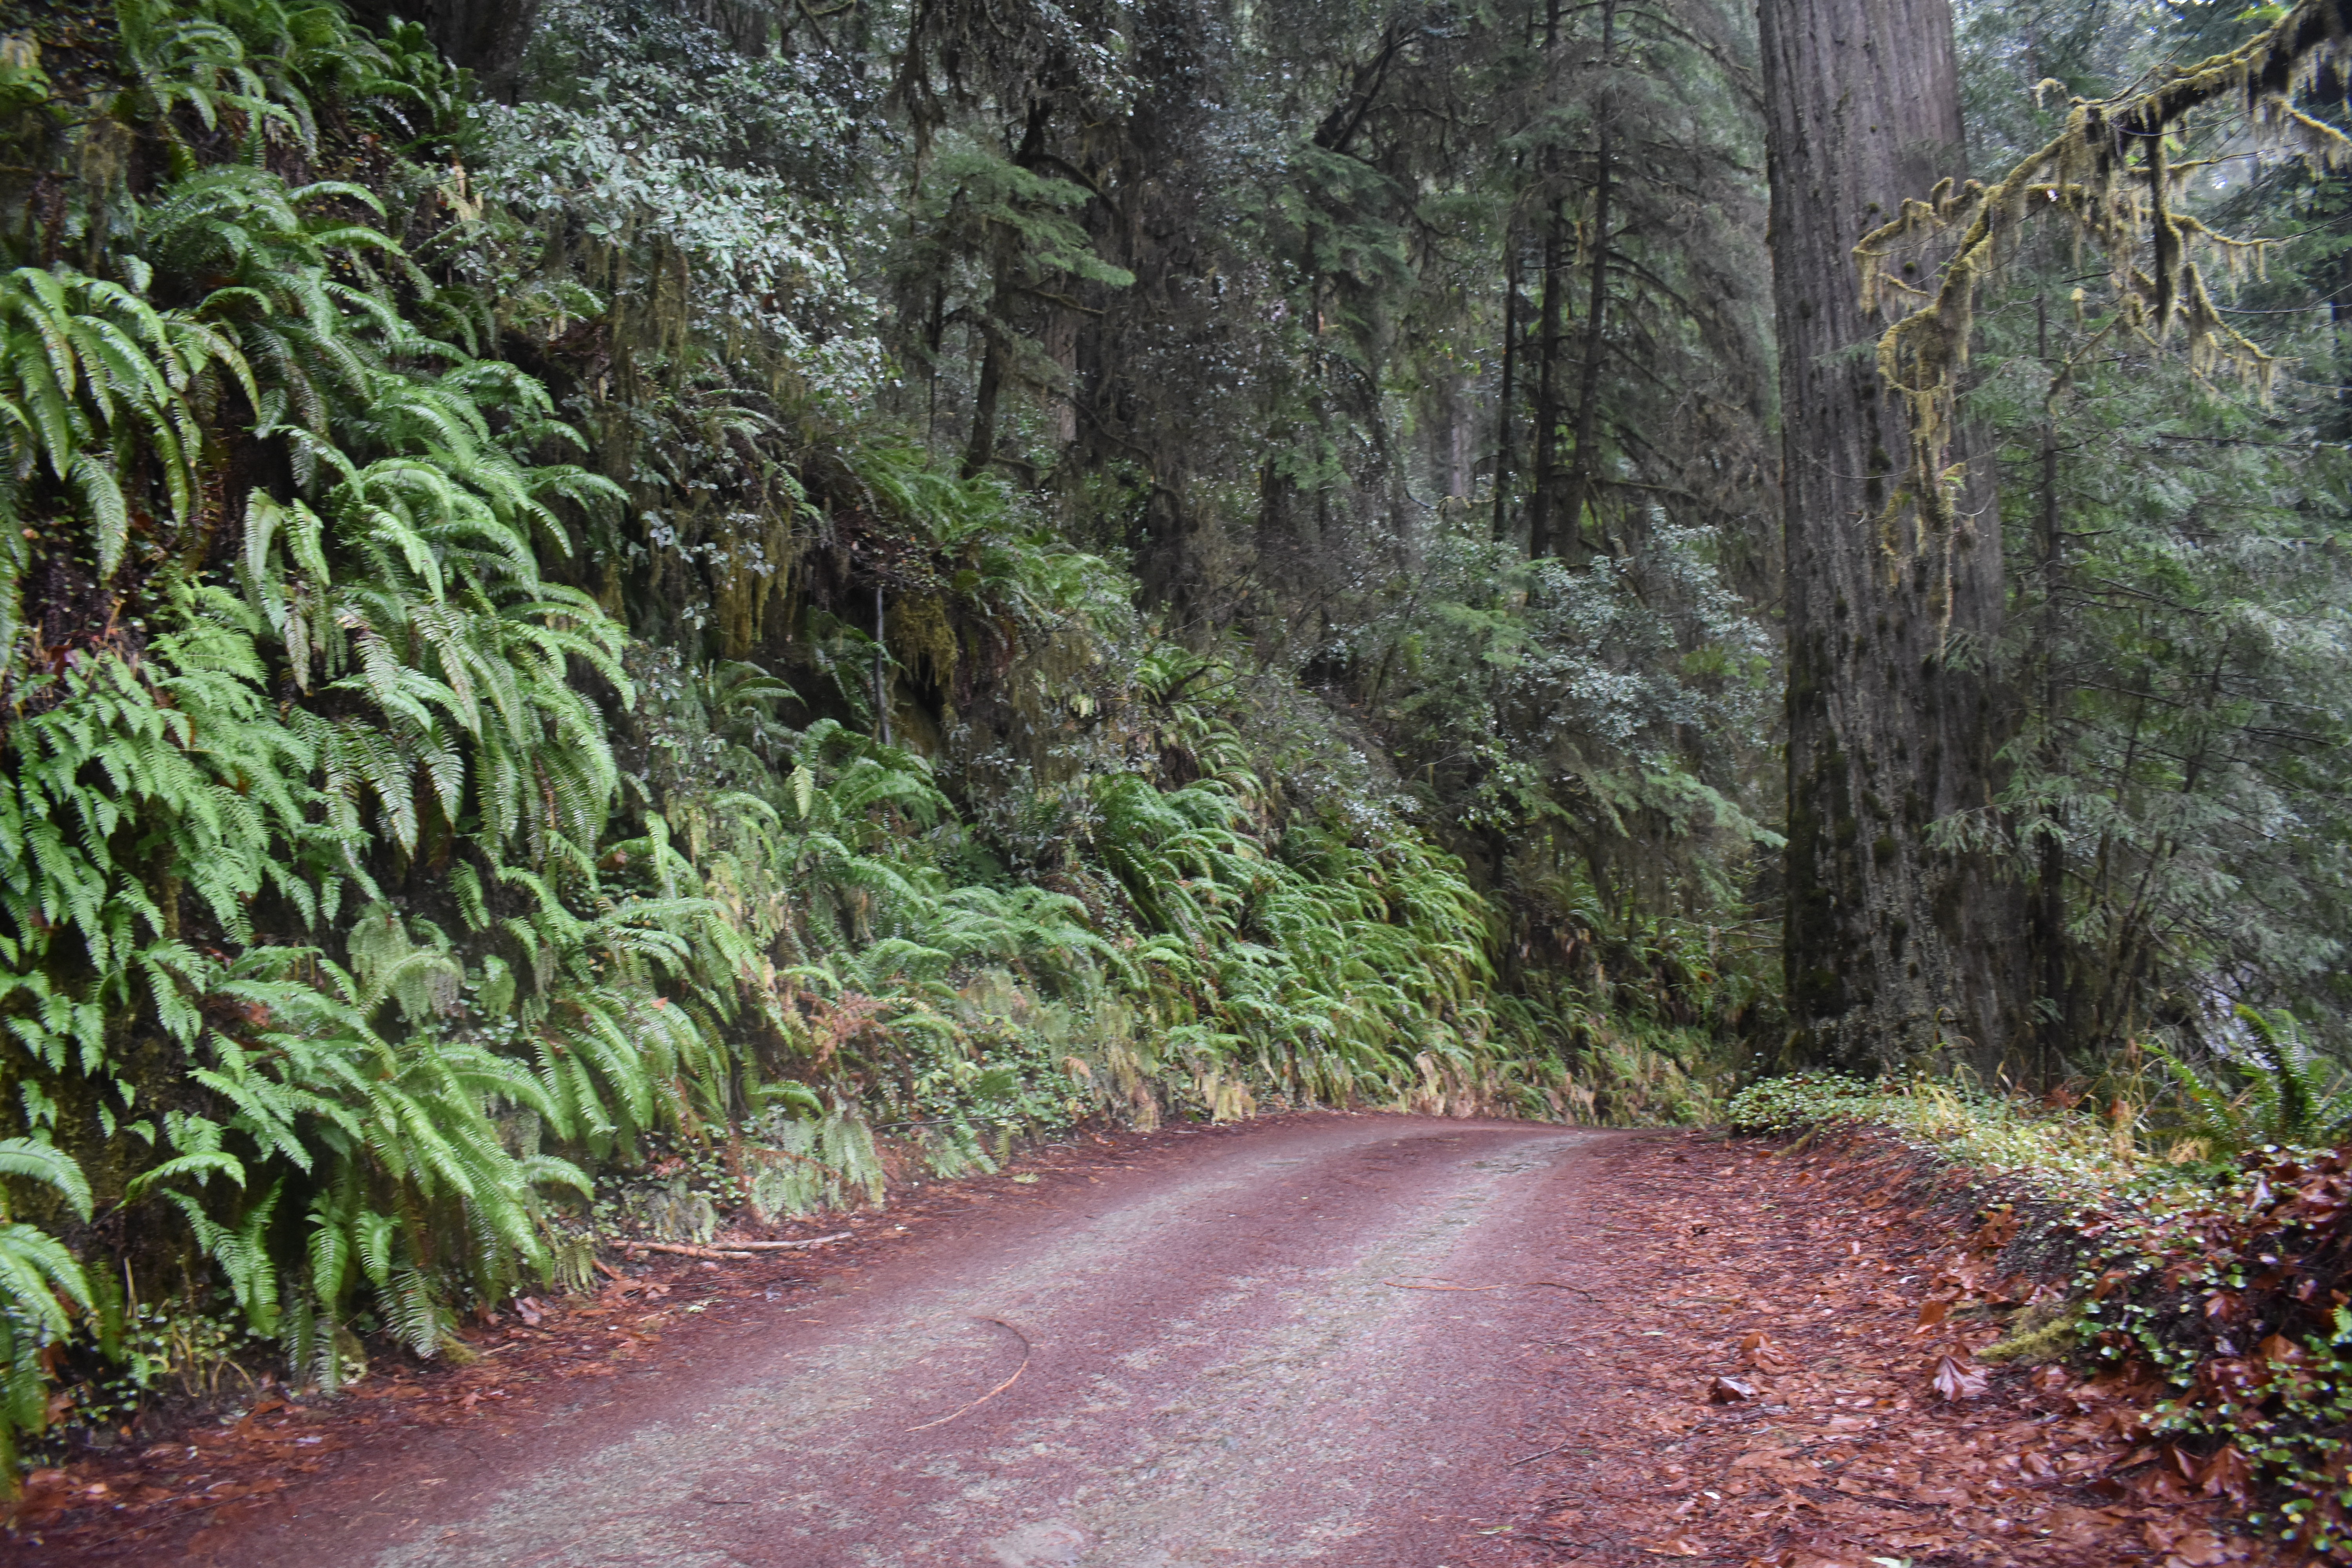 A dirt road with redwood trees all around.